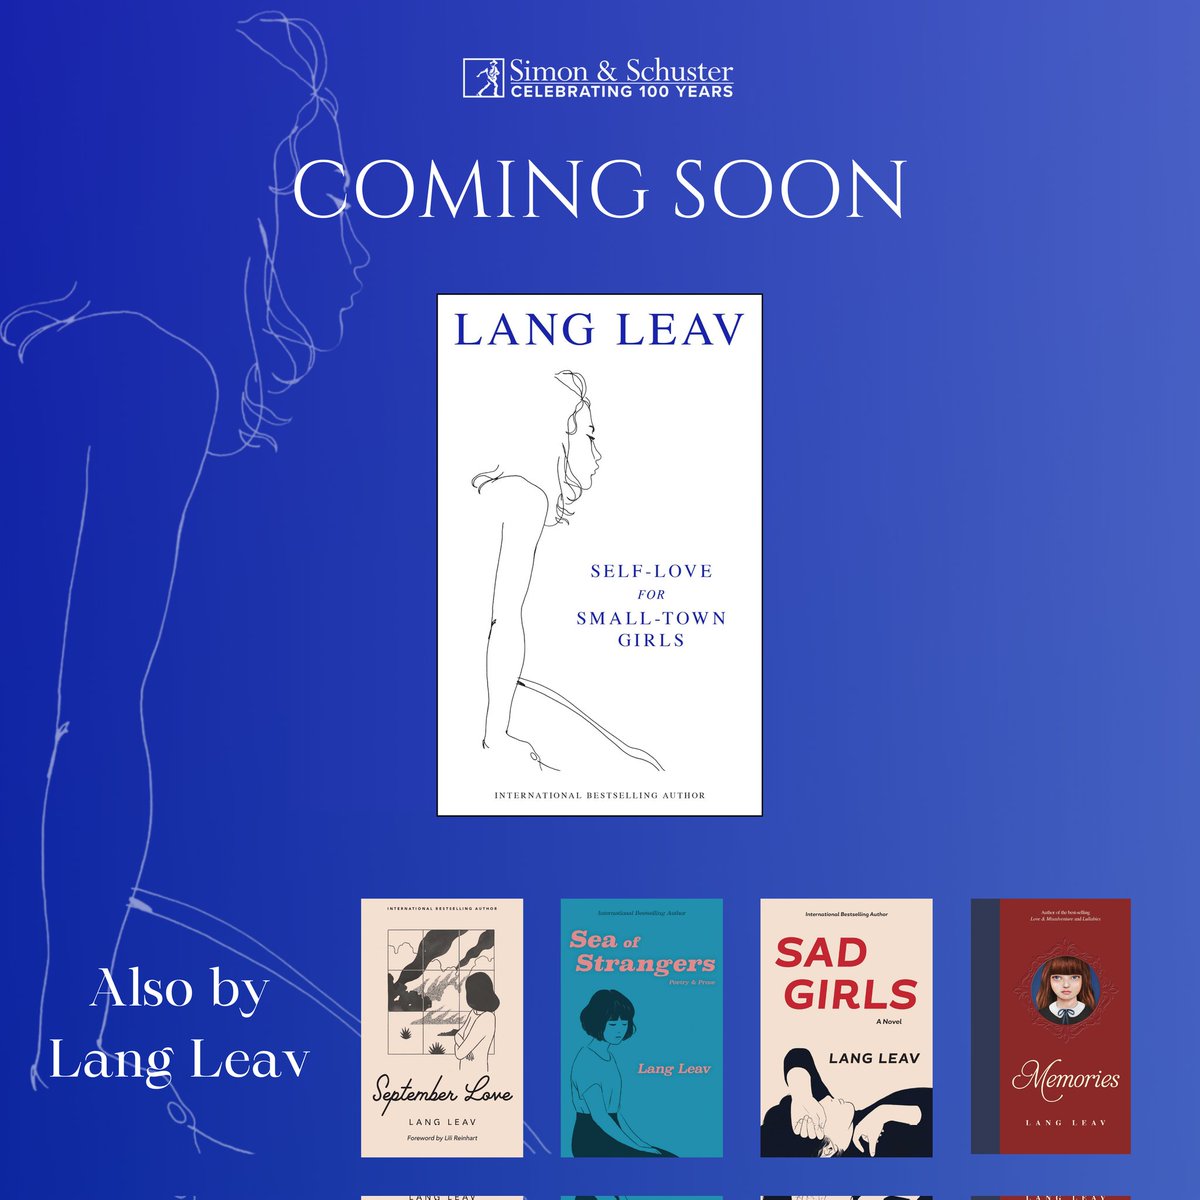 Fans of @langleav get ready to read the latest collection of poetry and prose! Releasing this January in India. Self-Love for Small Town Girls is an exciting offering from beloved bestselling author Lang Leav. A collection of stunning poetry and prose that seeks to define the…